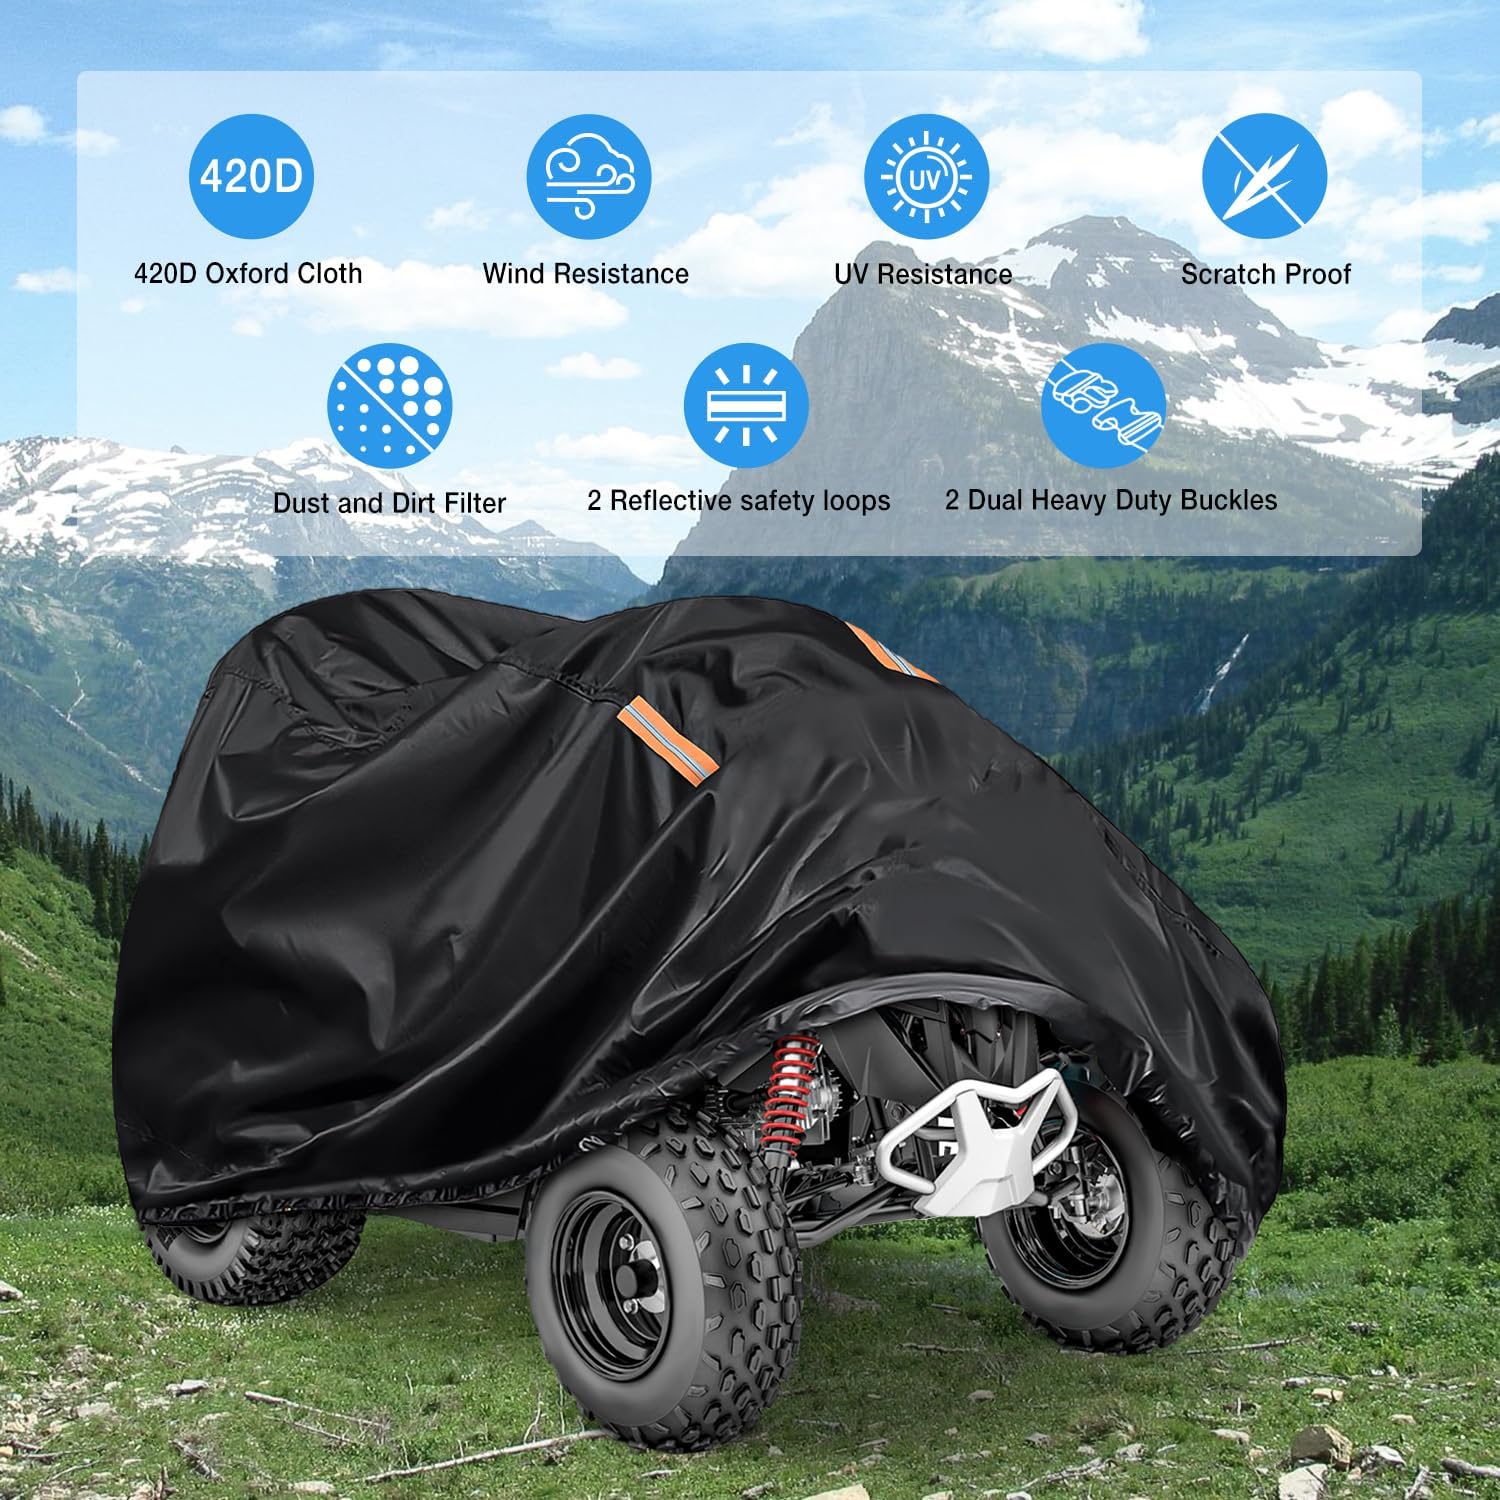 ATV Cover Waterproof 420D Heavy Duty Ripstop Material Black Protects 4 Wheeler from Snow Rain All Season All Weather UV Protection Fits up to 82" Nilight